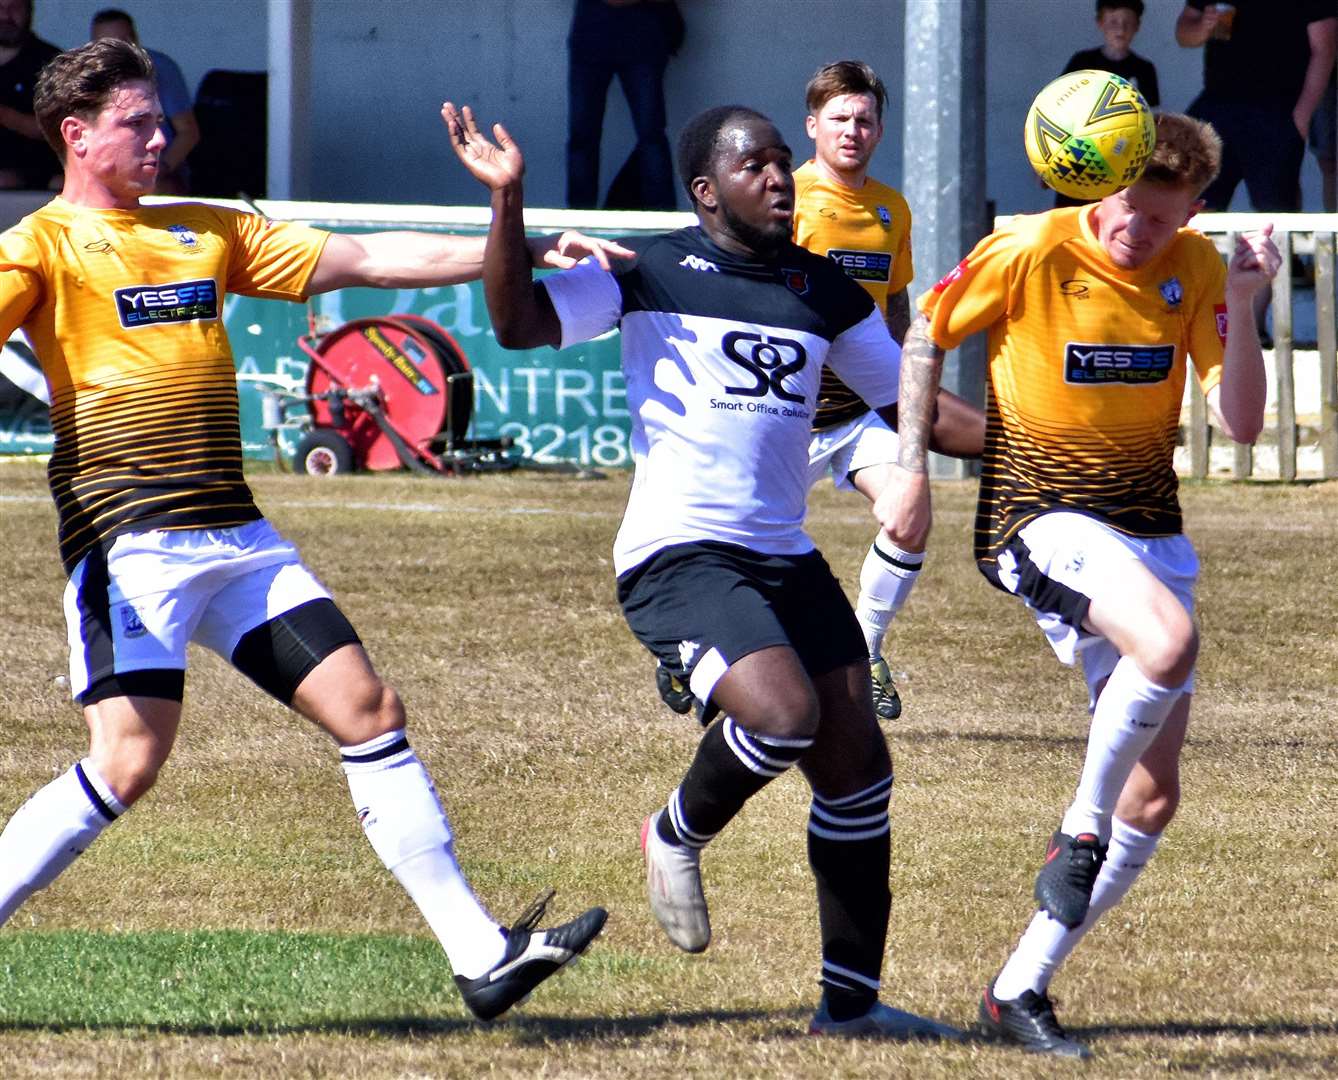 Striker Issa Mpenga in the thick of it for Town. Picture: Randolph File